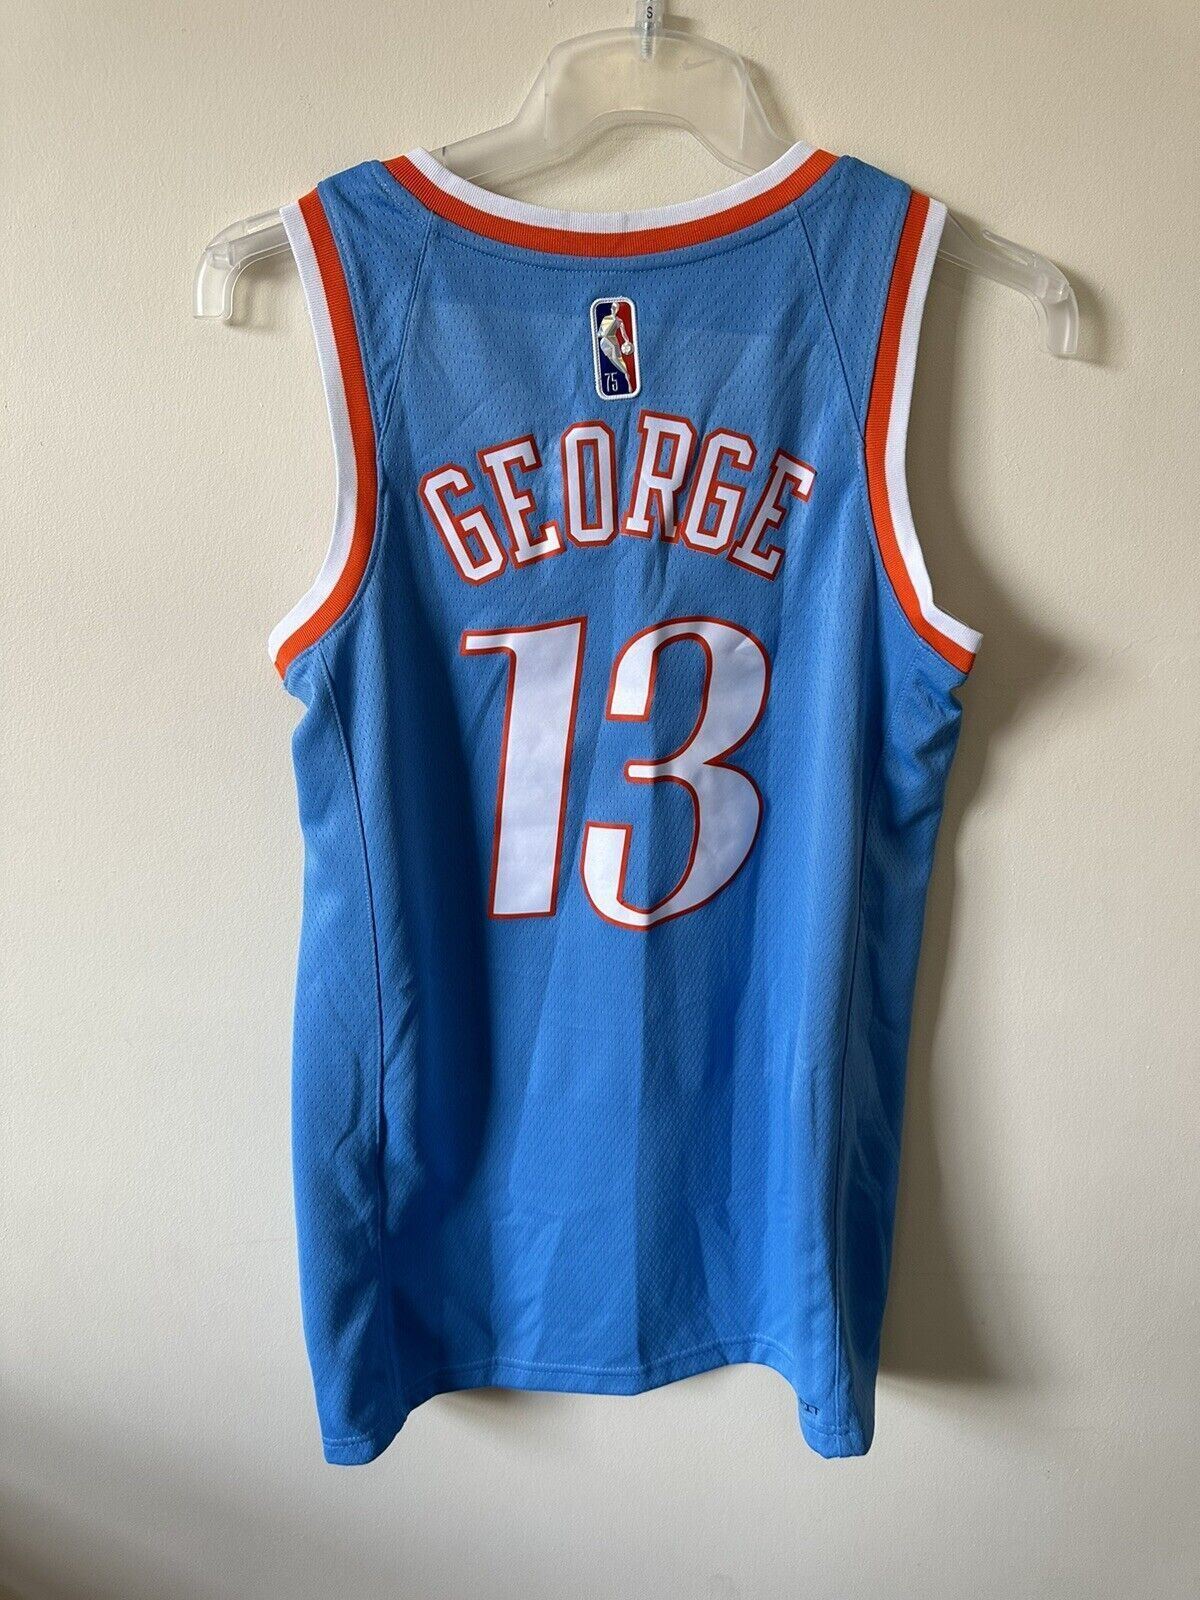 Nike NBA LA Clippers City Edition 75th Anniversary Jersey GEORGE 13 Mens Small